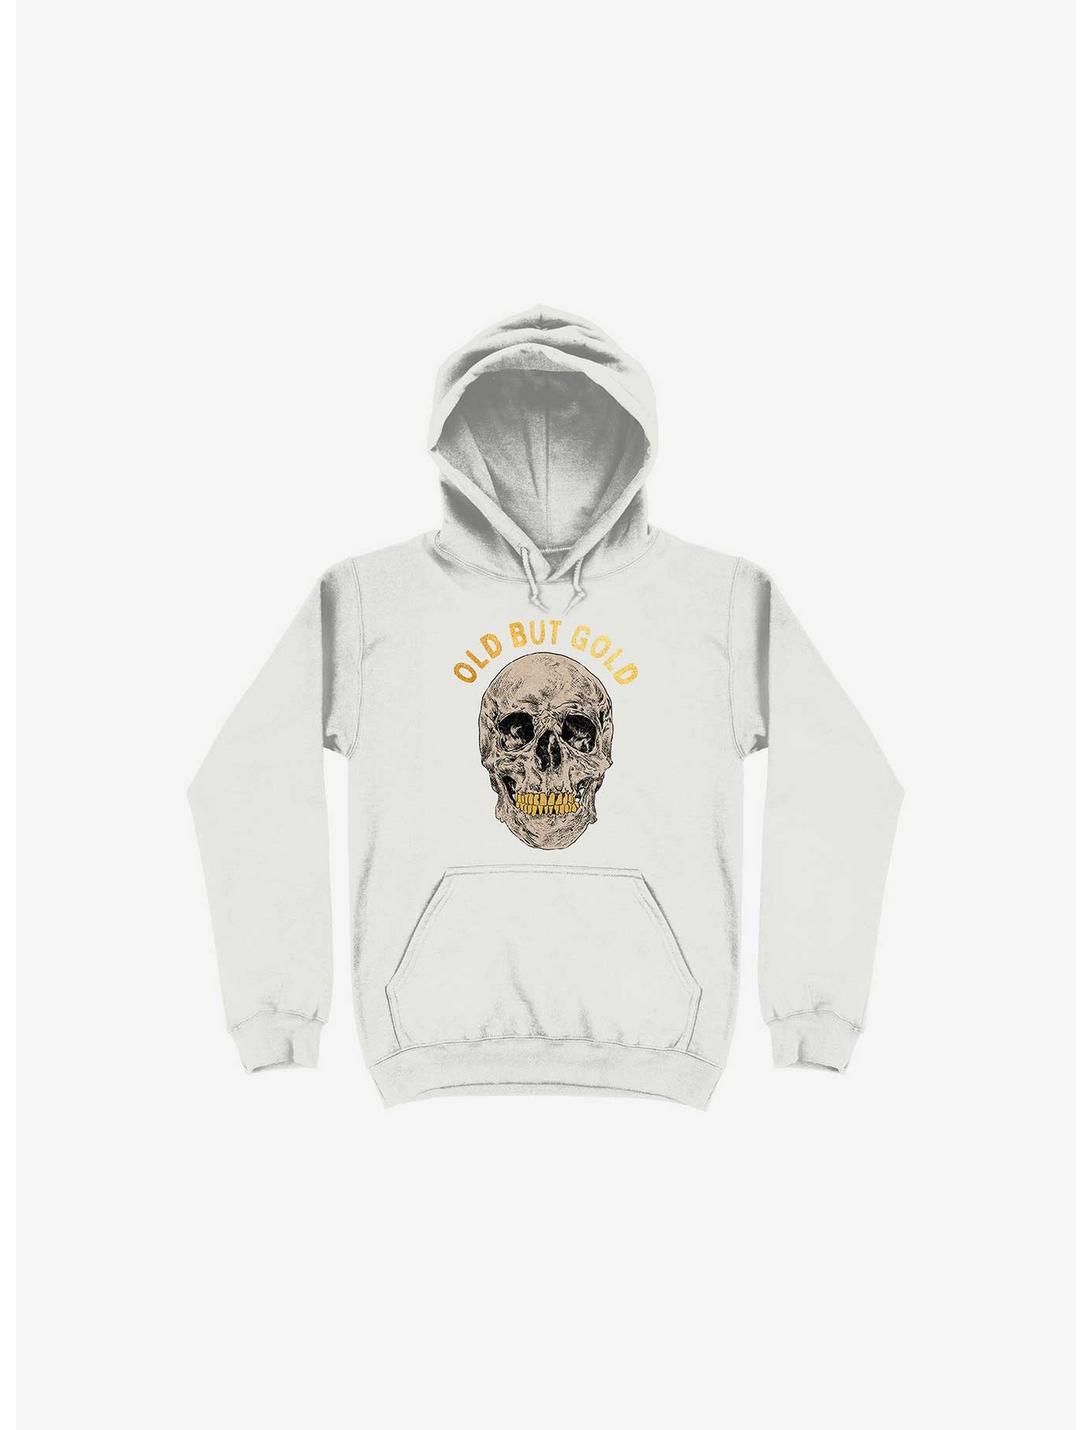 Old But Gold Skull White Hoodie, WHITE, hi-res